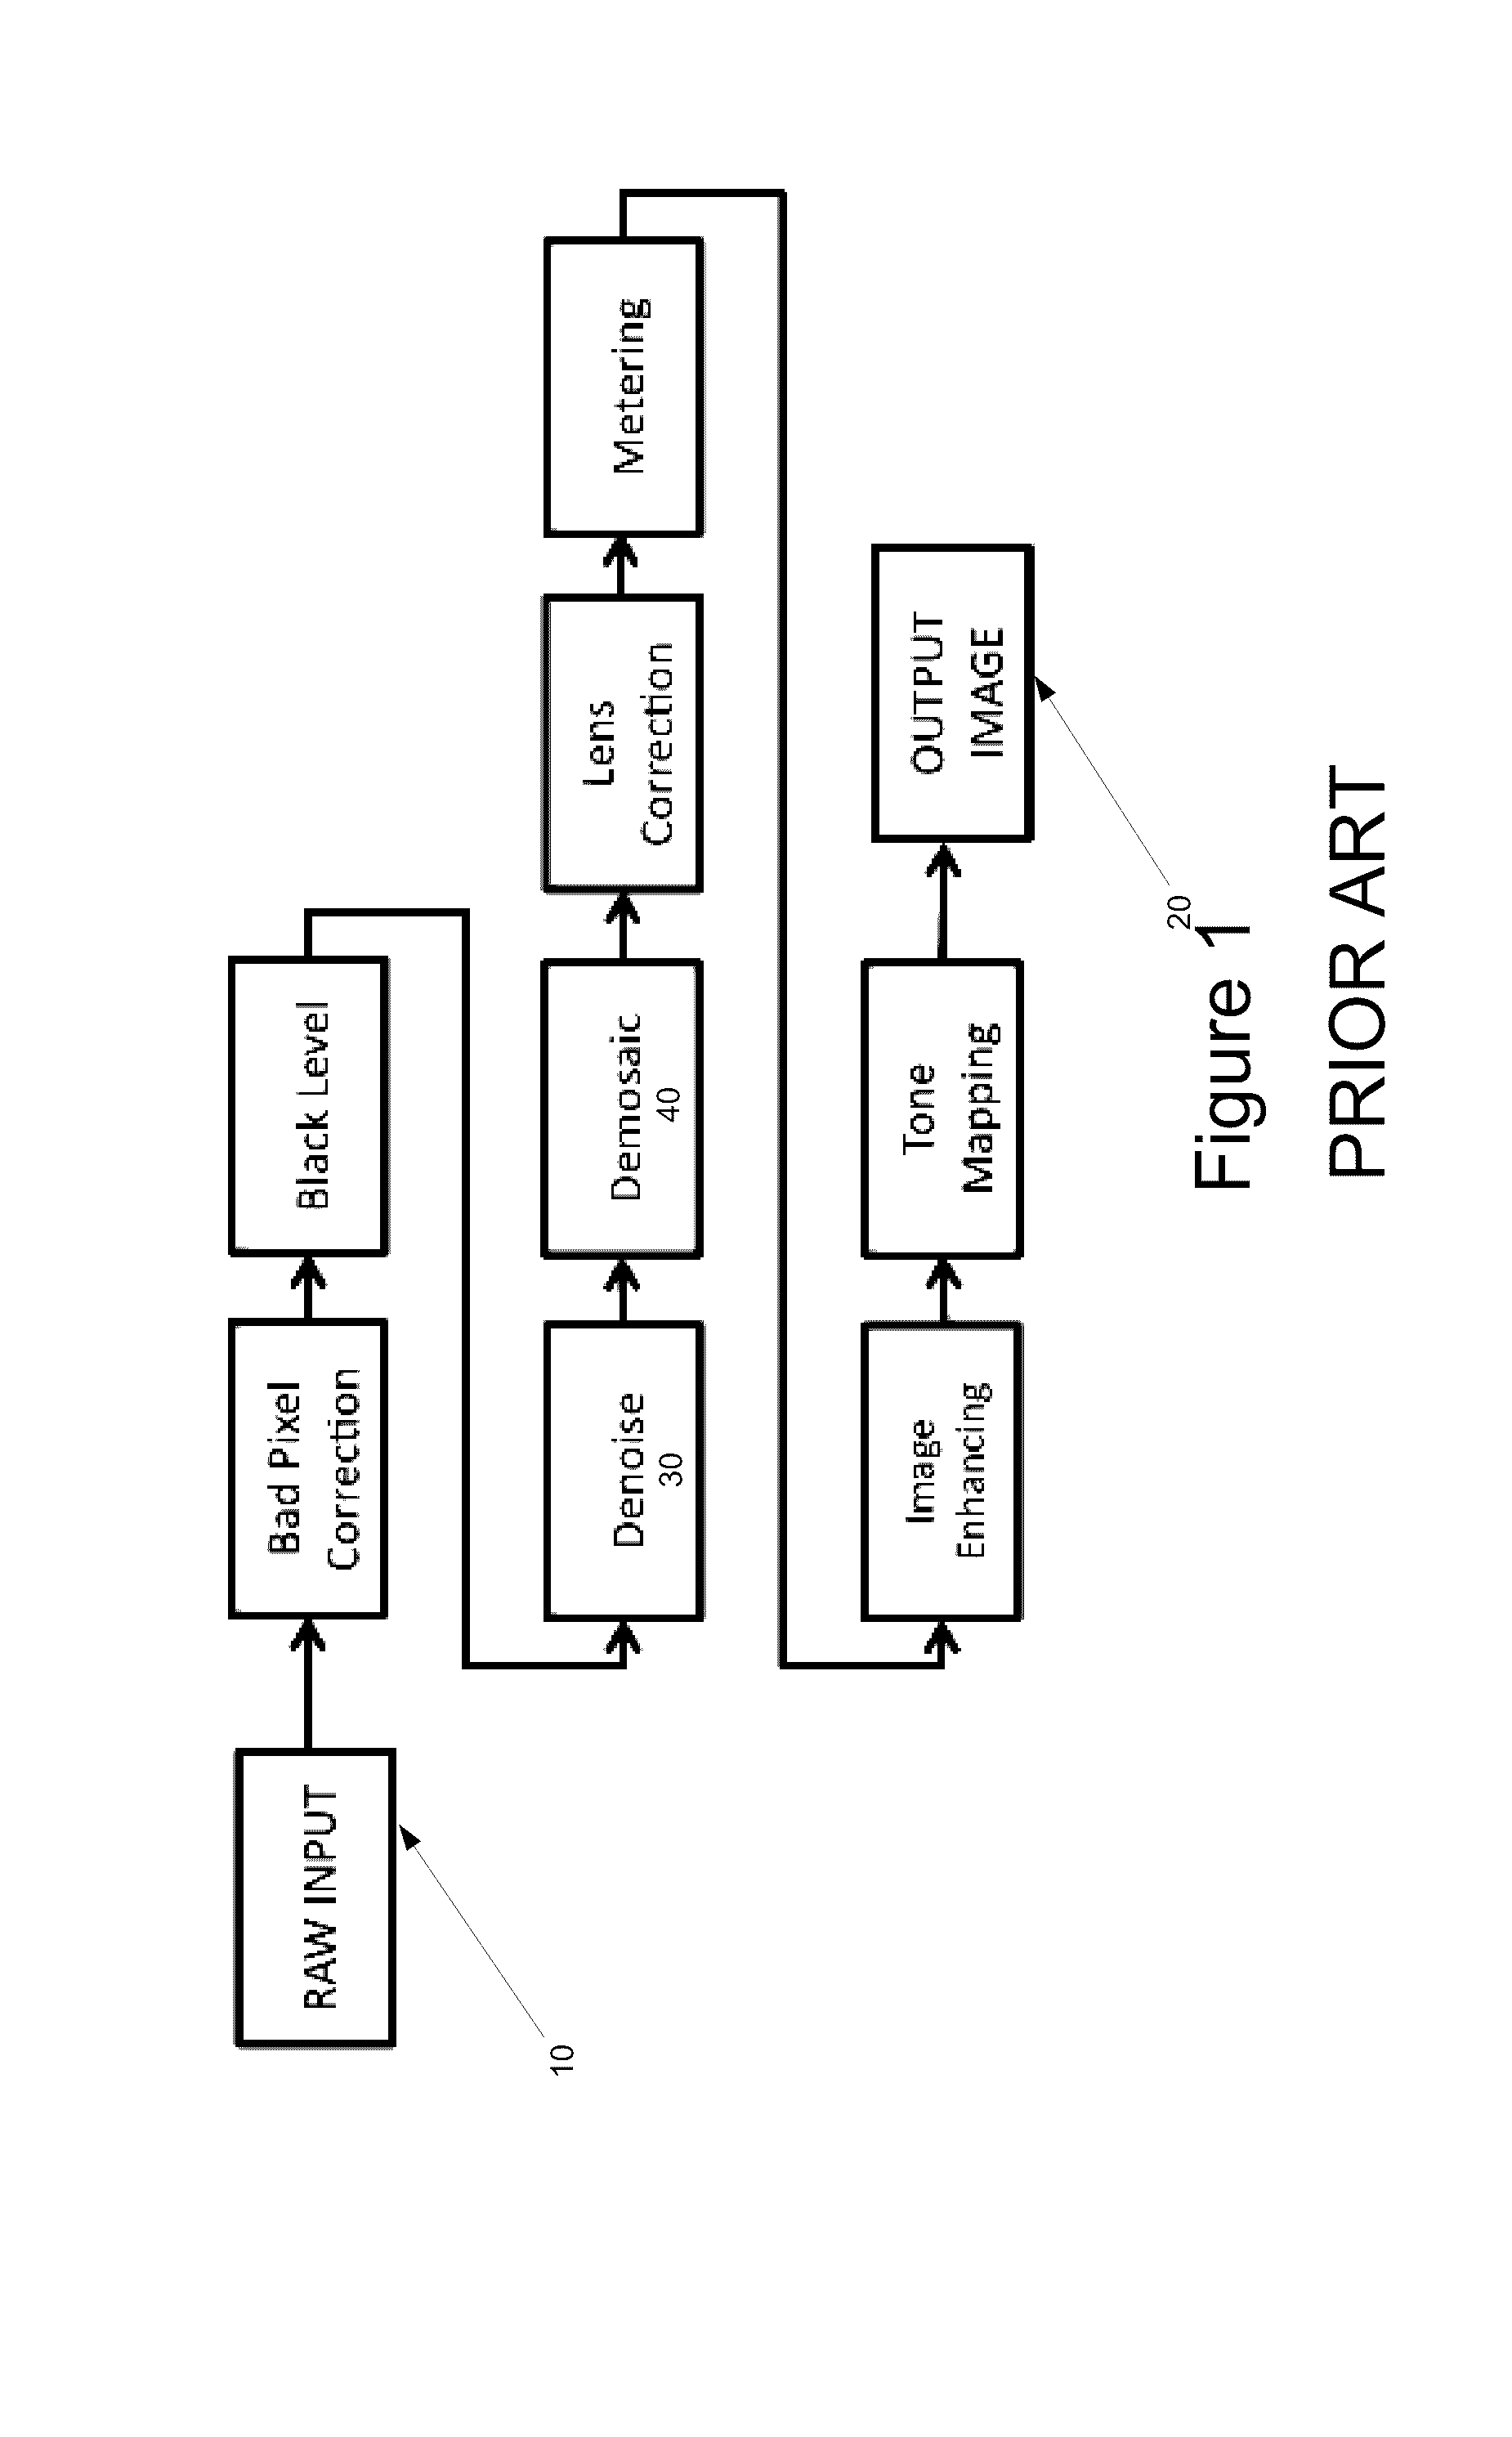 Unified optimization method for end-to-end camera image processing for translating a sensor captured image to a display image